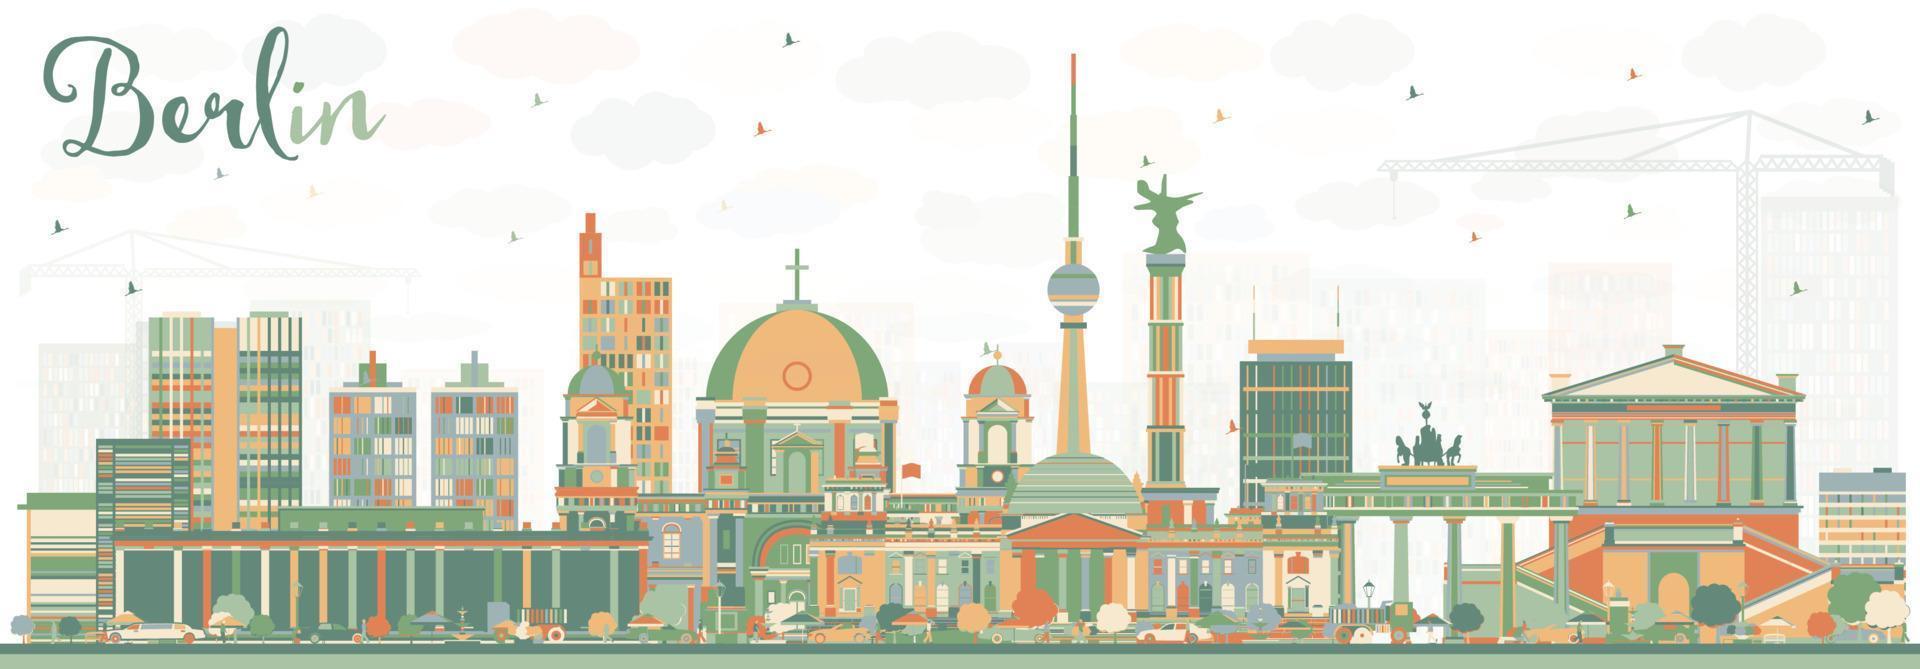 Abstract Berlin Skyline with Color Buildings. vector